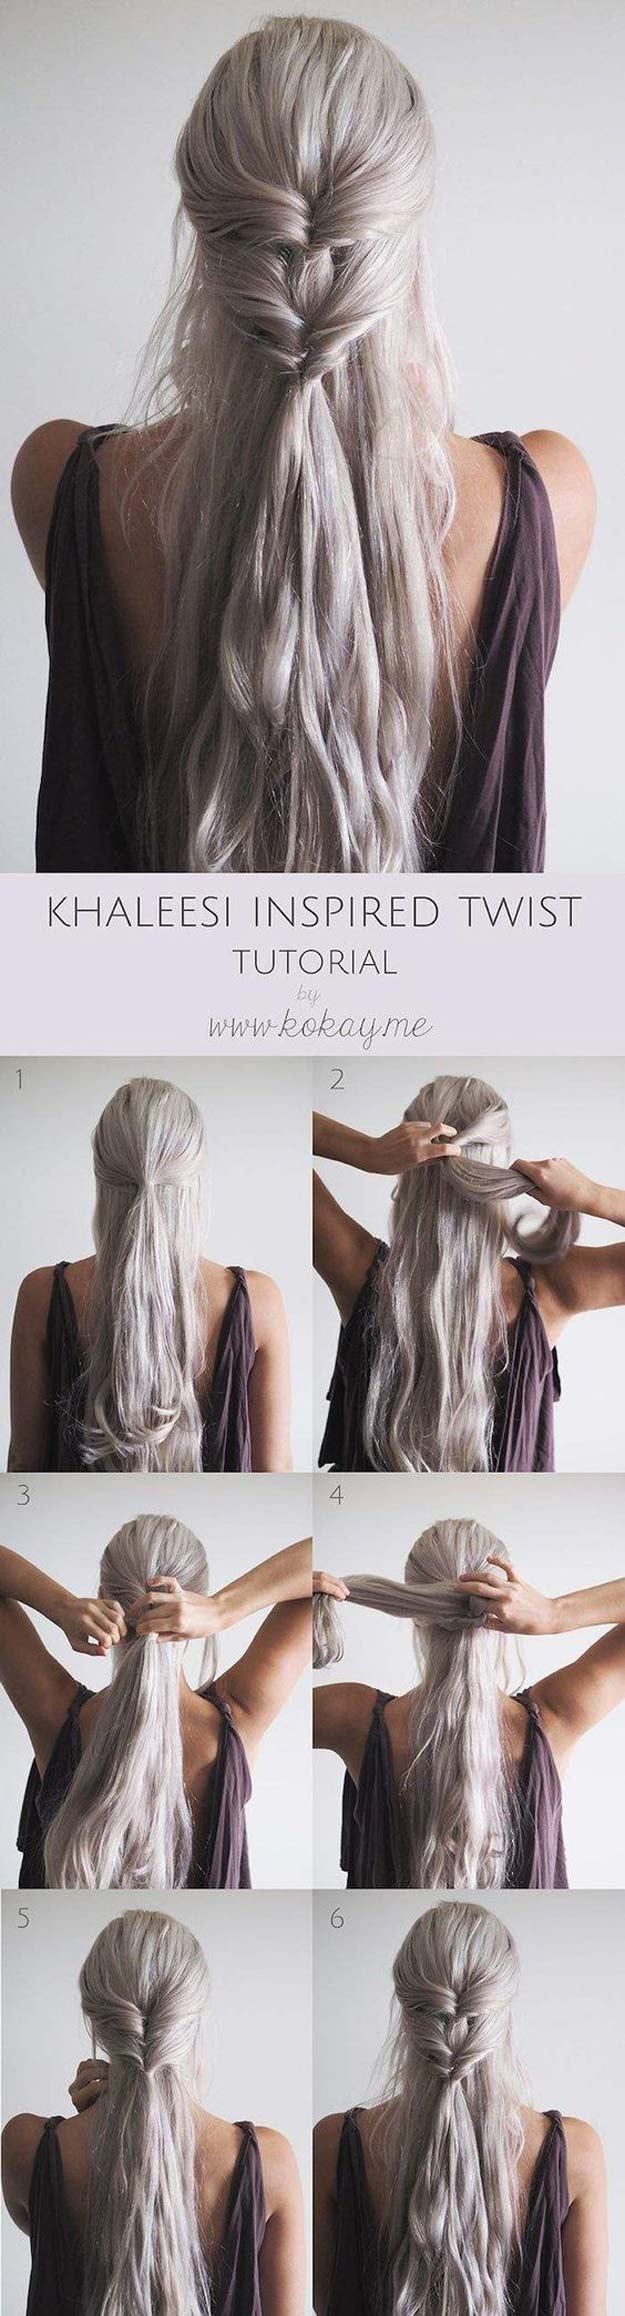 Best Hairstyles for Long Hair - Khaleesi Inspired Twist - Step by Step Tutorials for Easy Curls, Updo, Half Up, Braids and Lazy Girl Looks. Prom Ideas, Special Occasion Hair and Braiding Instructions for Teens, Teenagers and Adults, Women and Girls 